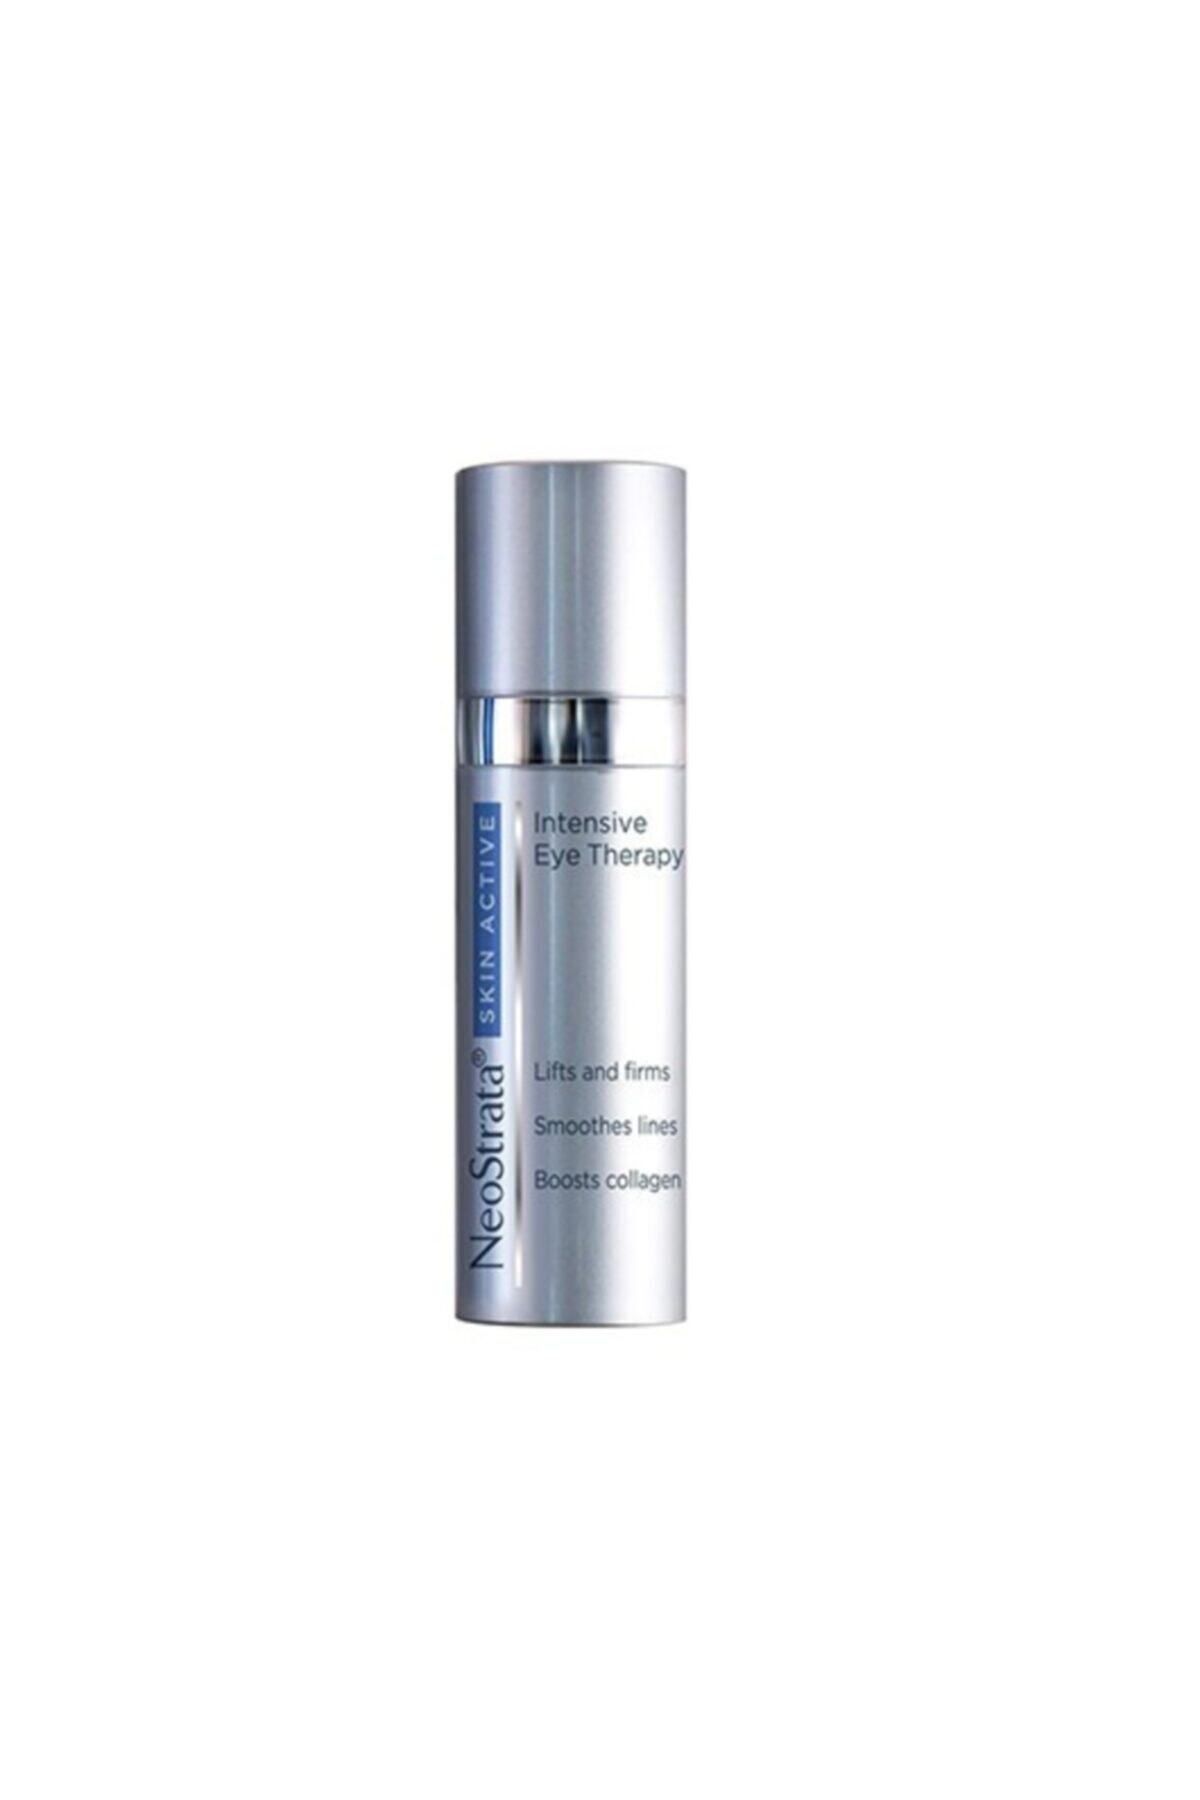 NeoStrata Skin Active Intensive Eye Therapy 15 Ml